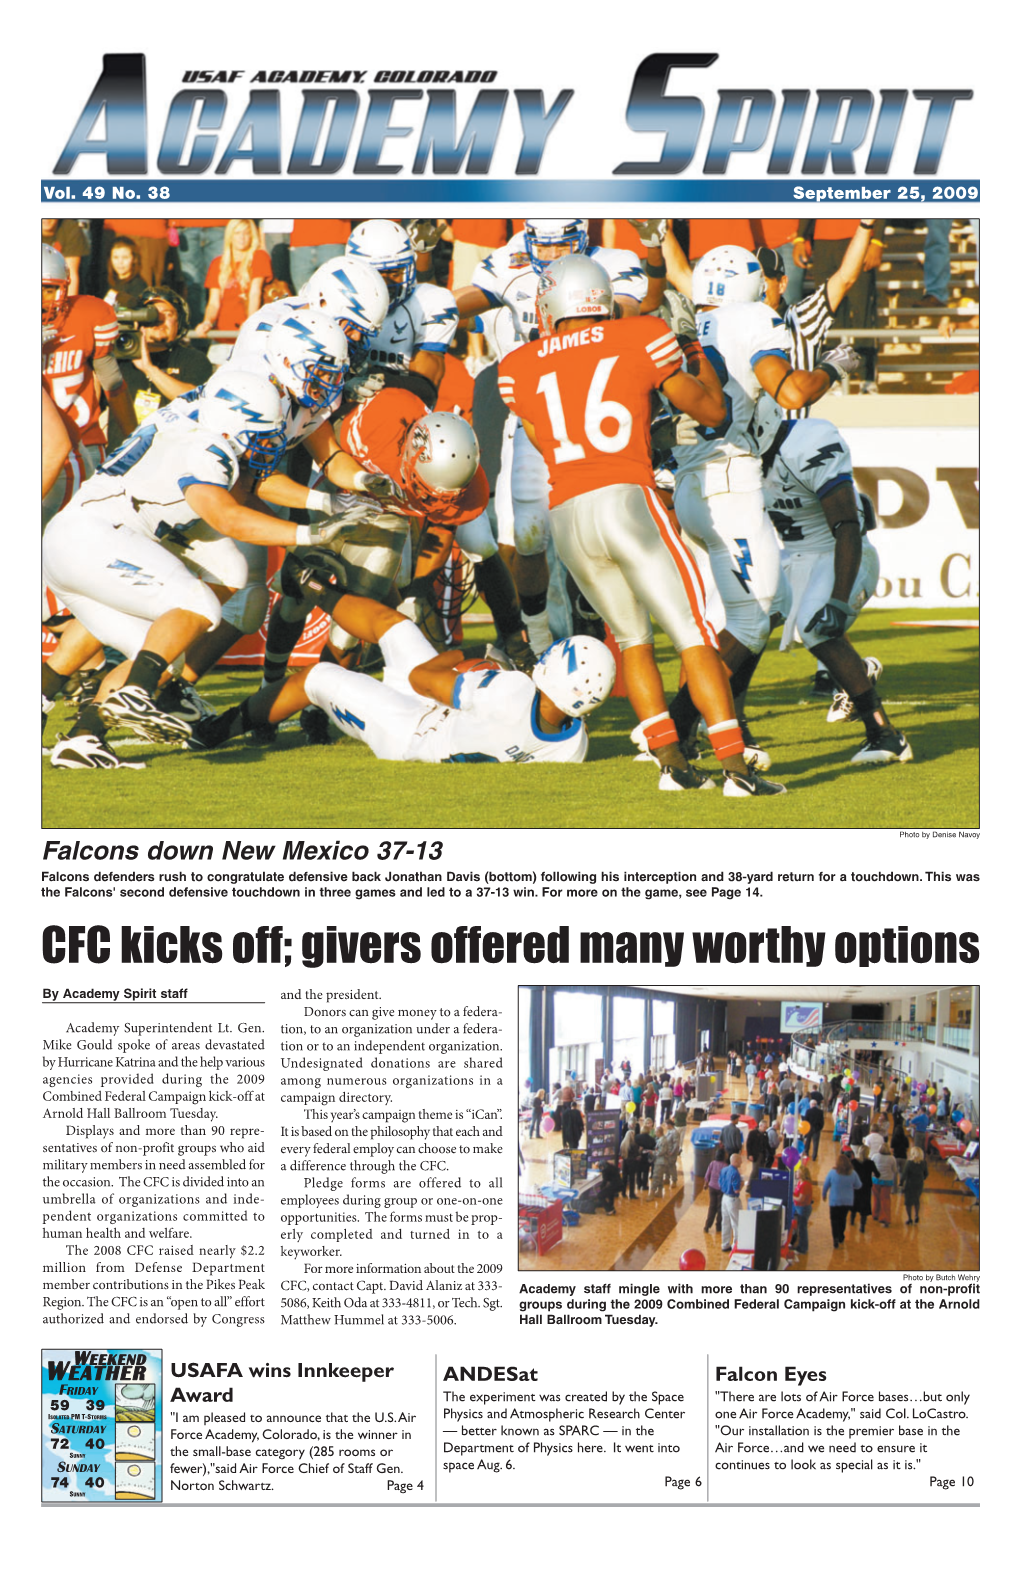 CFC Kicks Off; Givers Offered Many Worthy Options